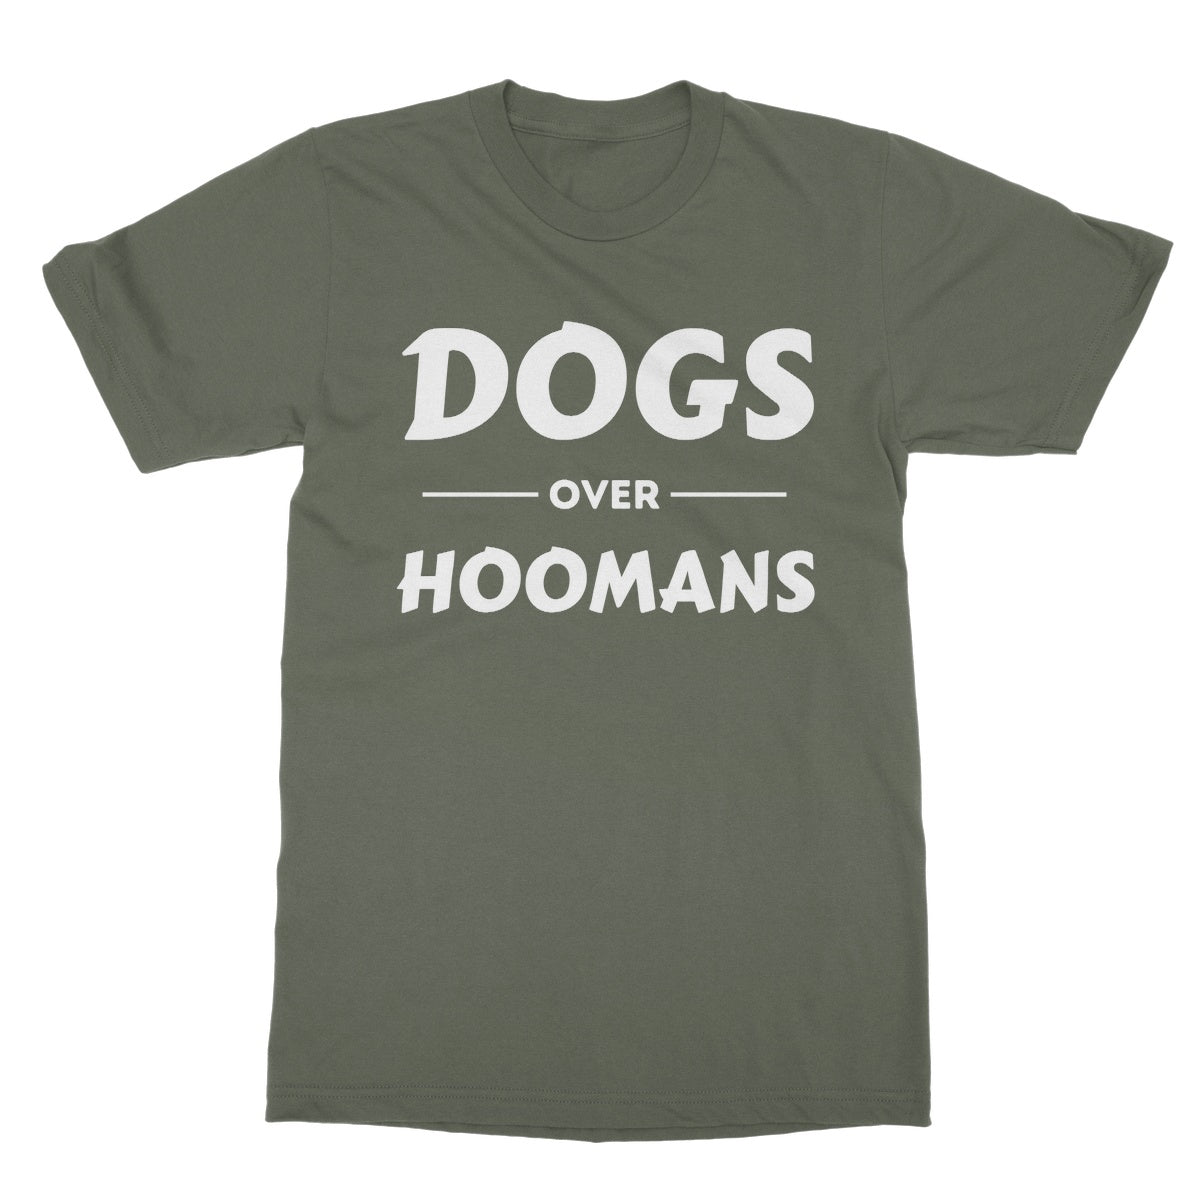 dogs over hoomans t shirt green